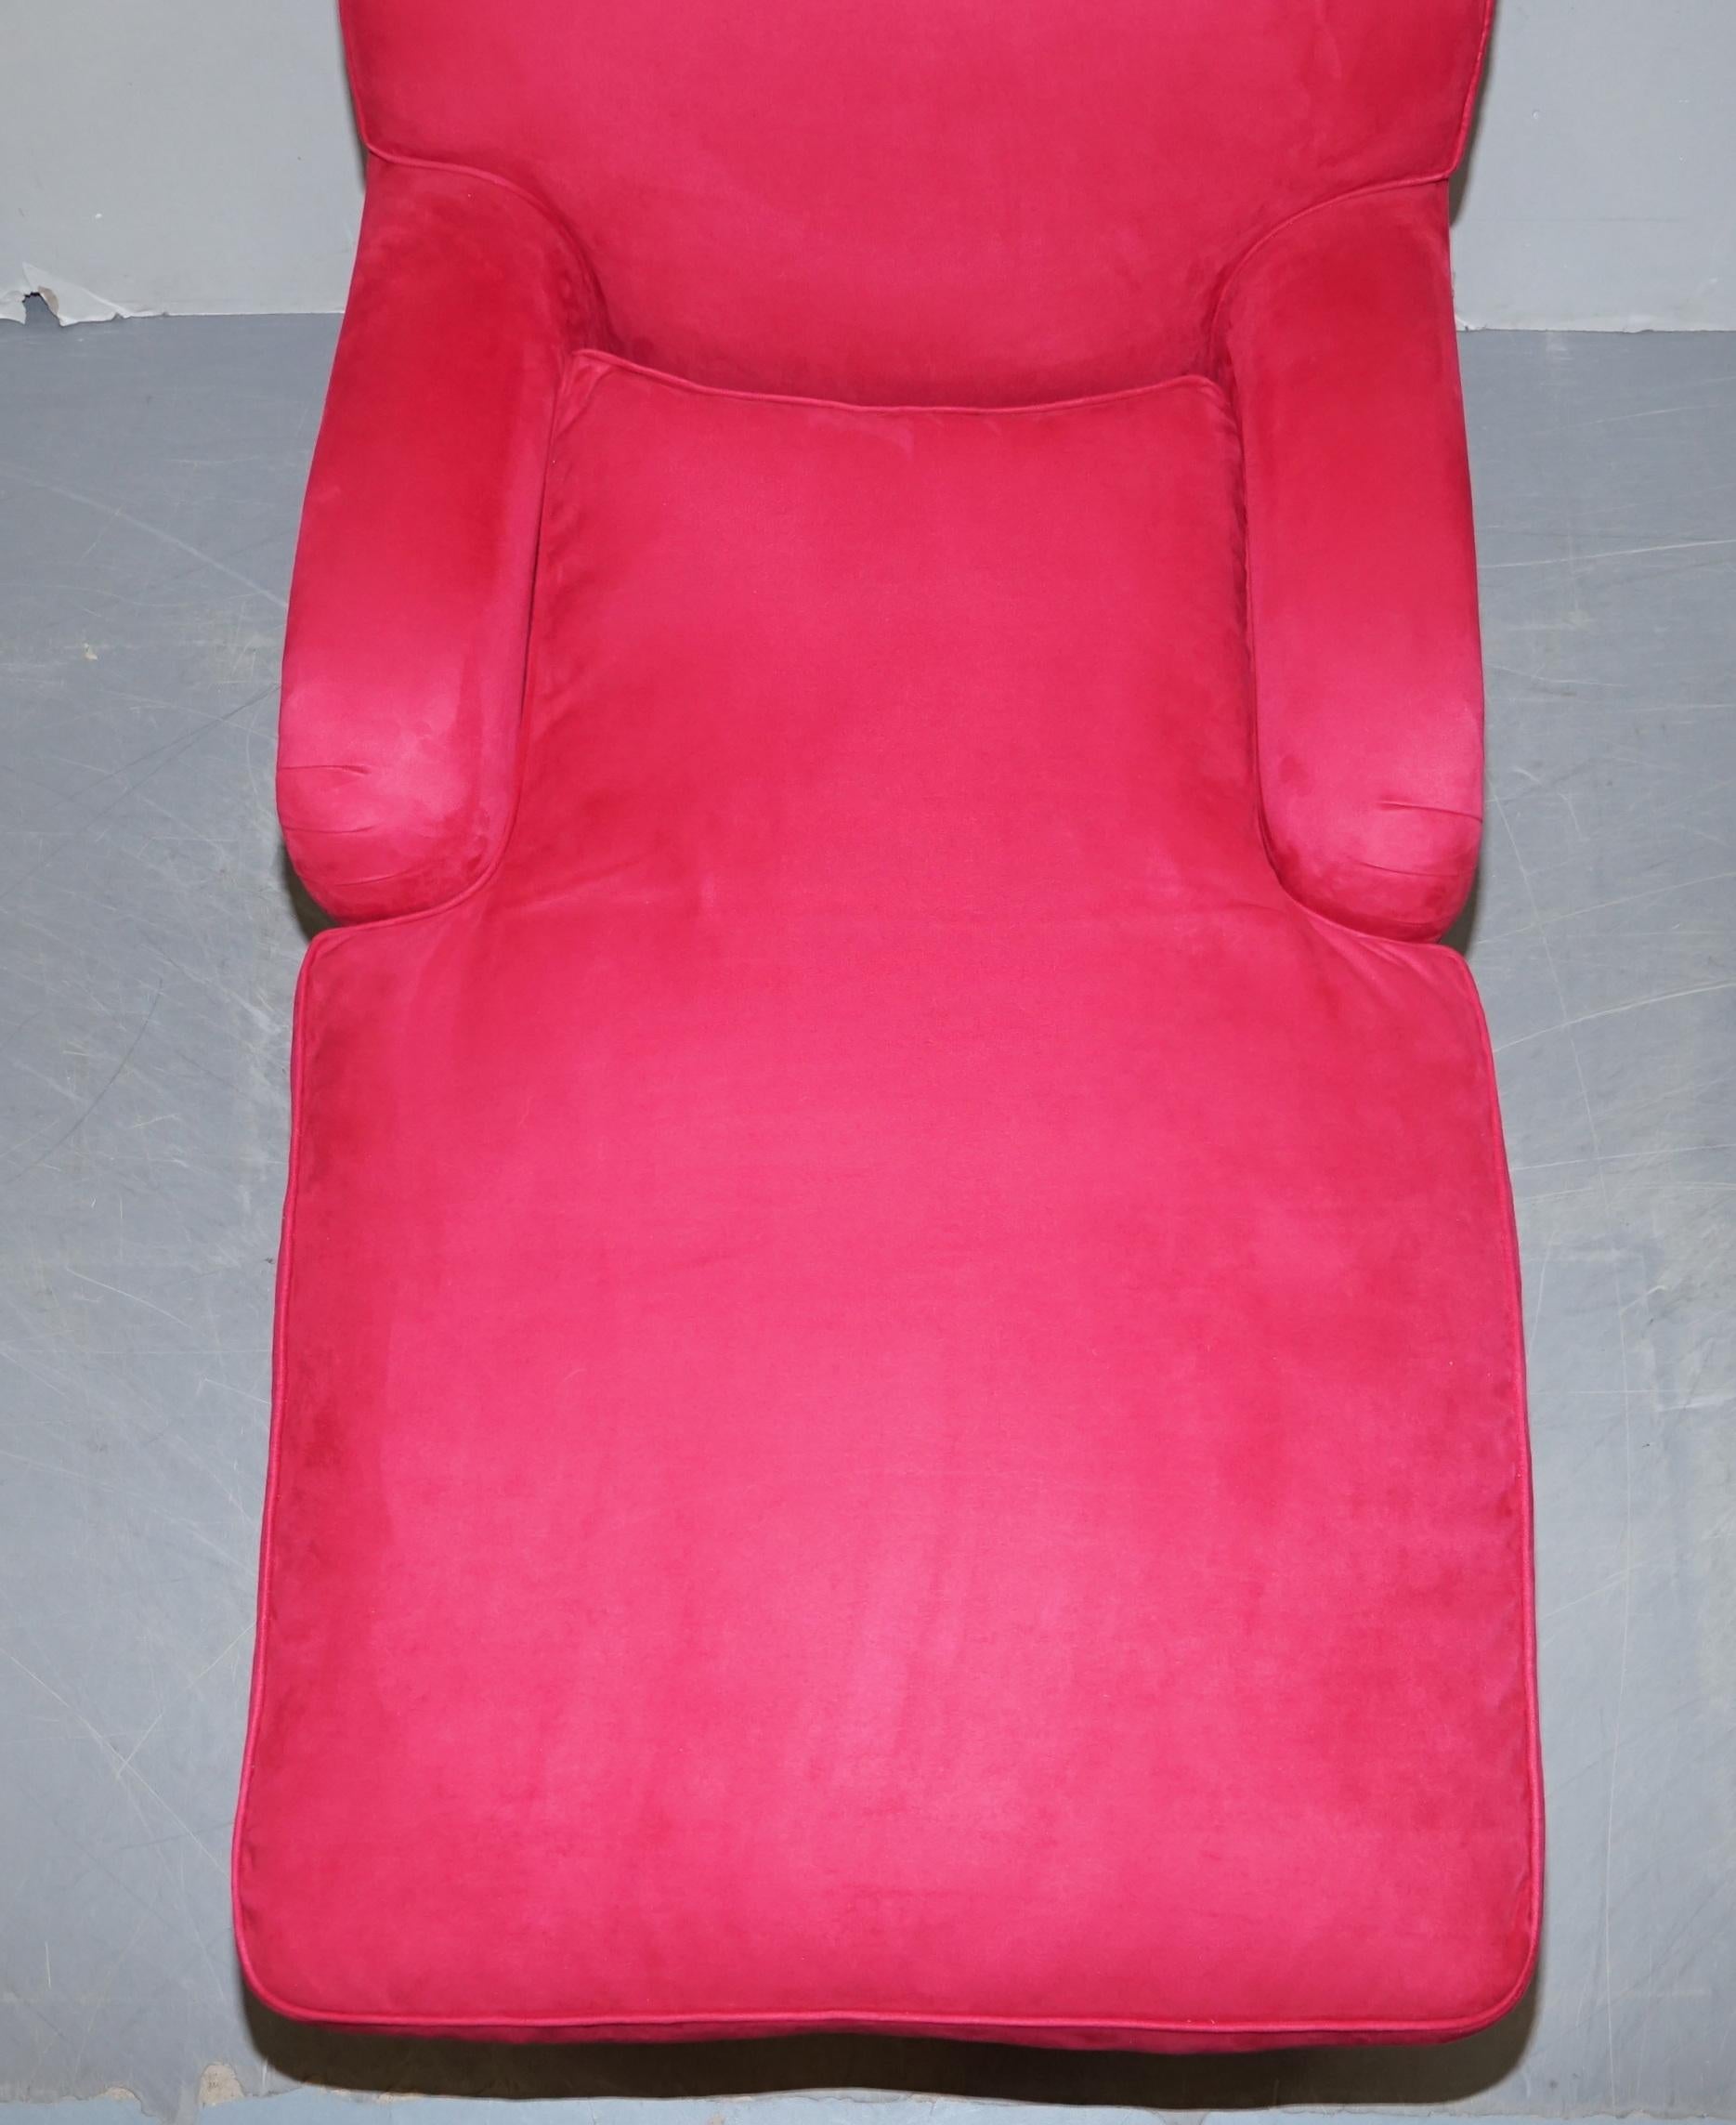 Luxurious Comfortable Red Velvet Signature Scroll Arm Chaise Lounge Armchair 1